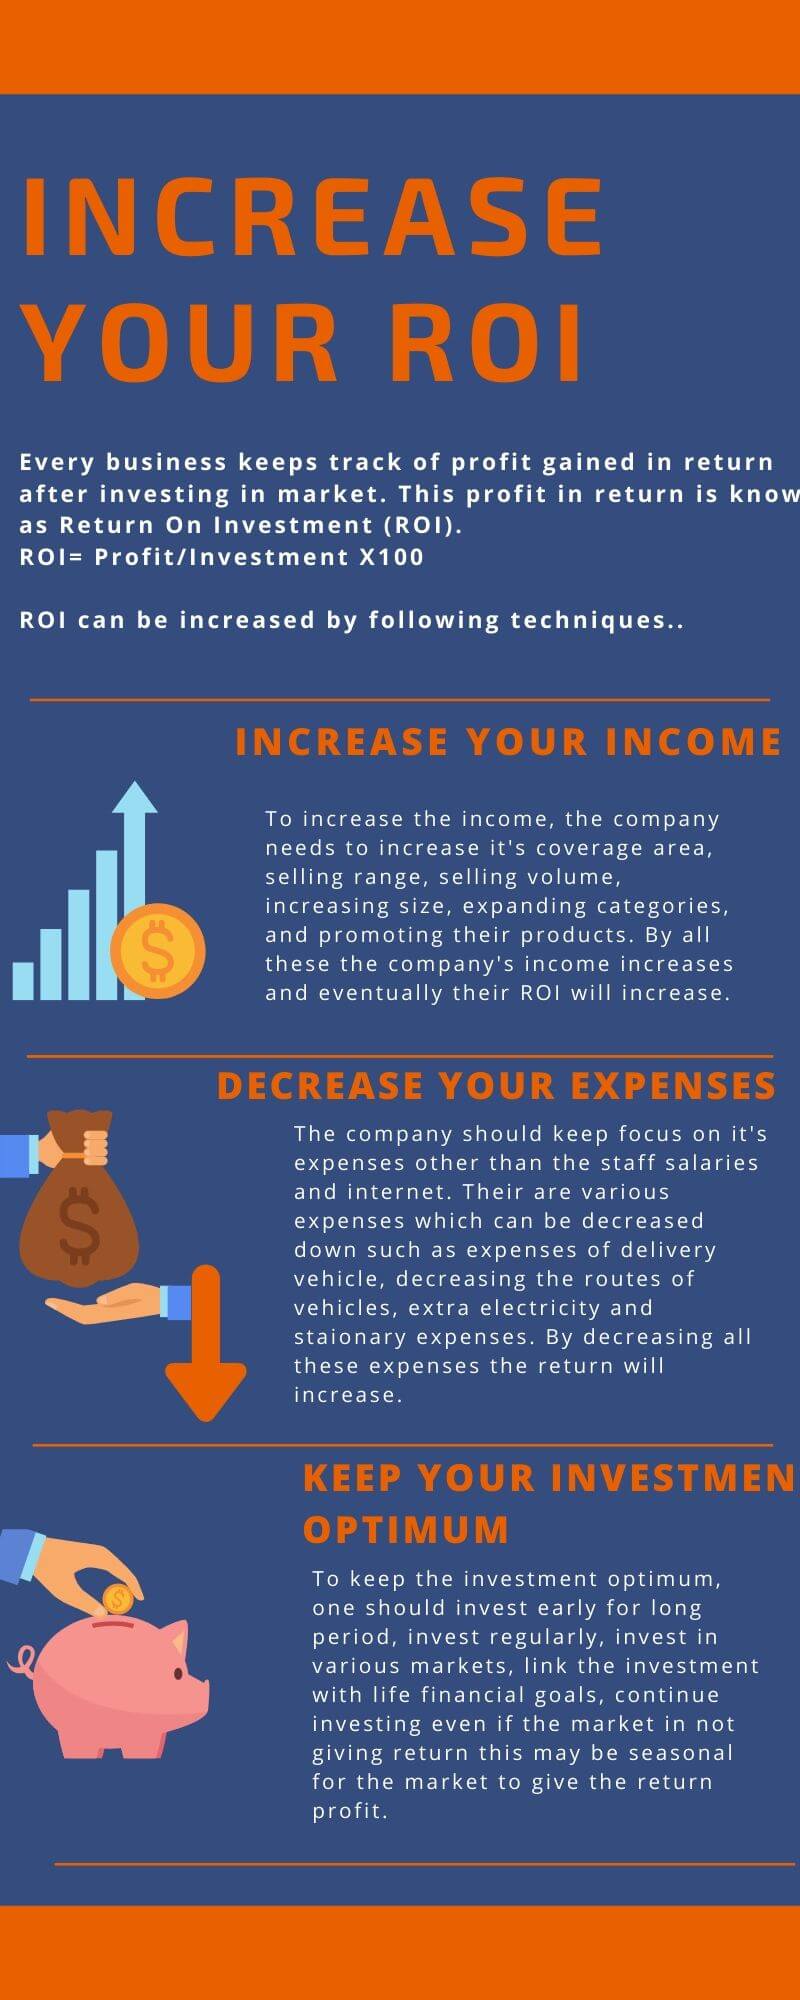 METHODS TO INCREASE YOUR ROI